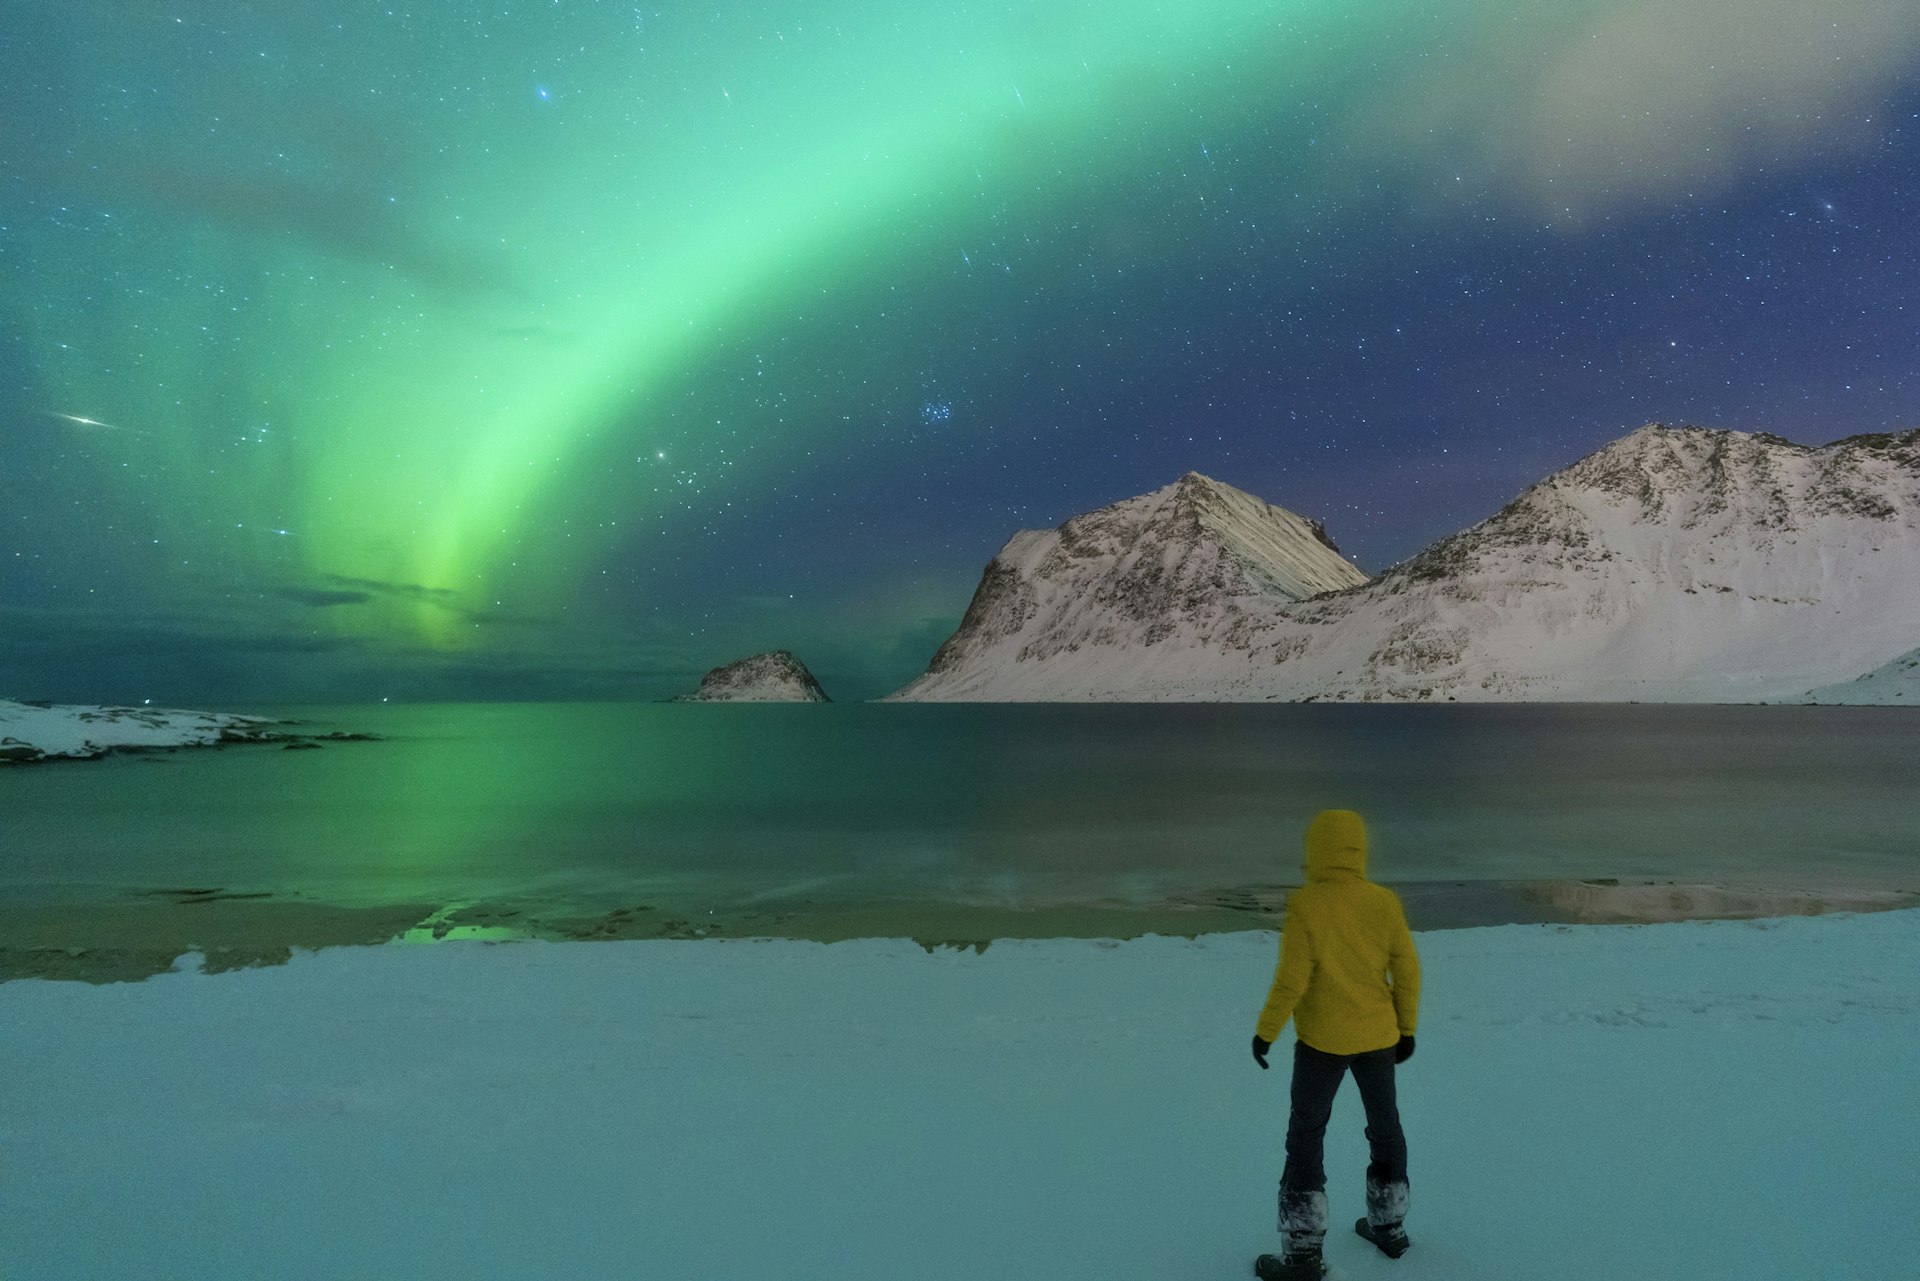 A person stands on a shore as greens and blues of the northern lights swirl in the sky above